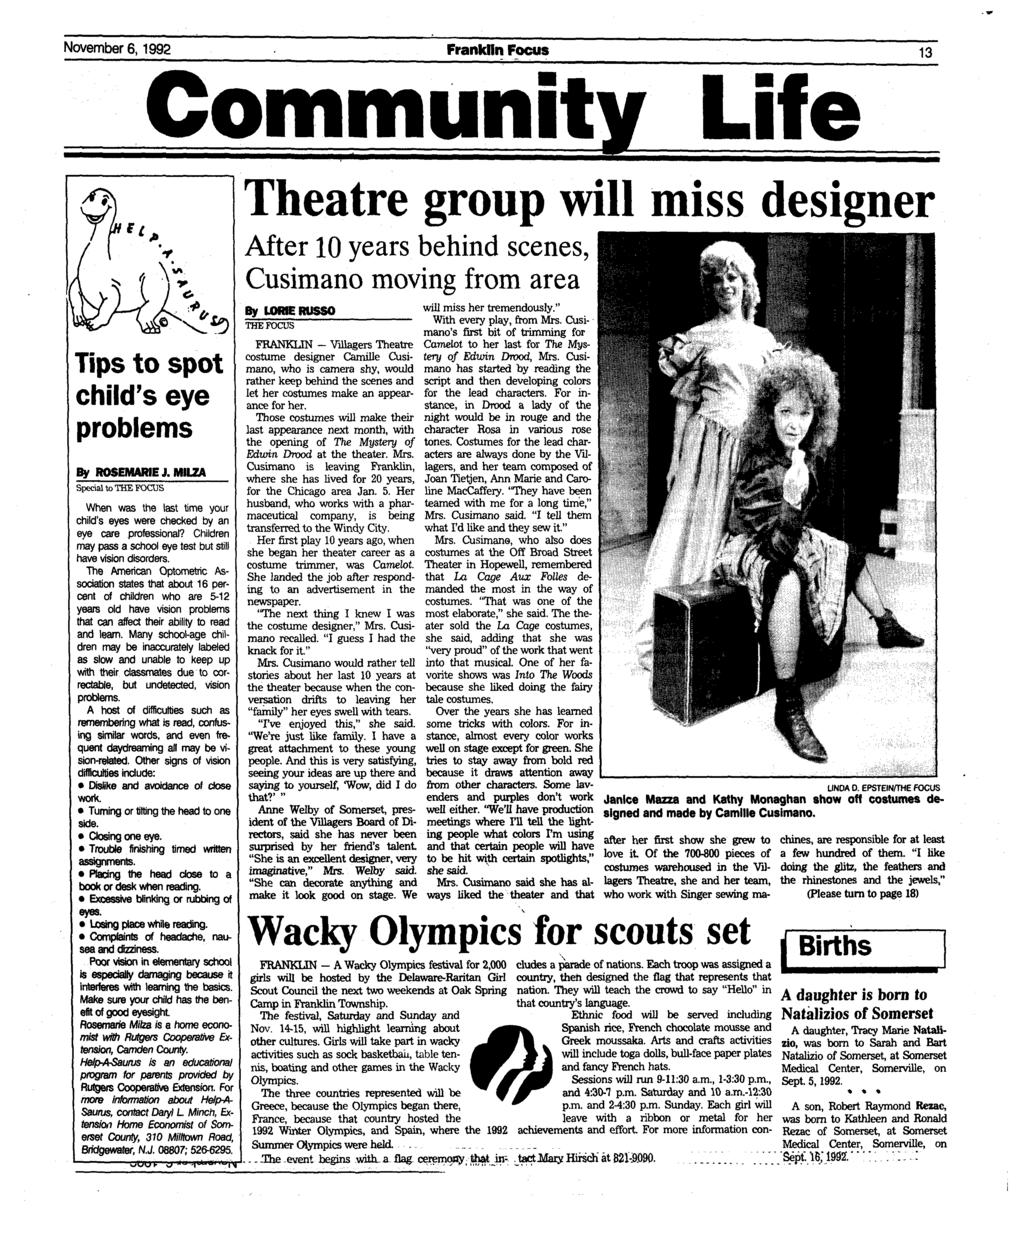 November 6,1992 Franklin Focus 13 Community Life Theatre group will miss designer After 10 years behind scenes Cusimano moving from area Tips to spot child's eye problems By ROSEMARIEJ.